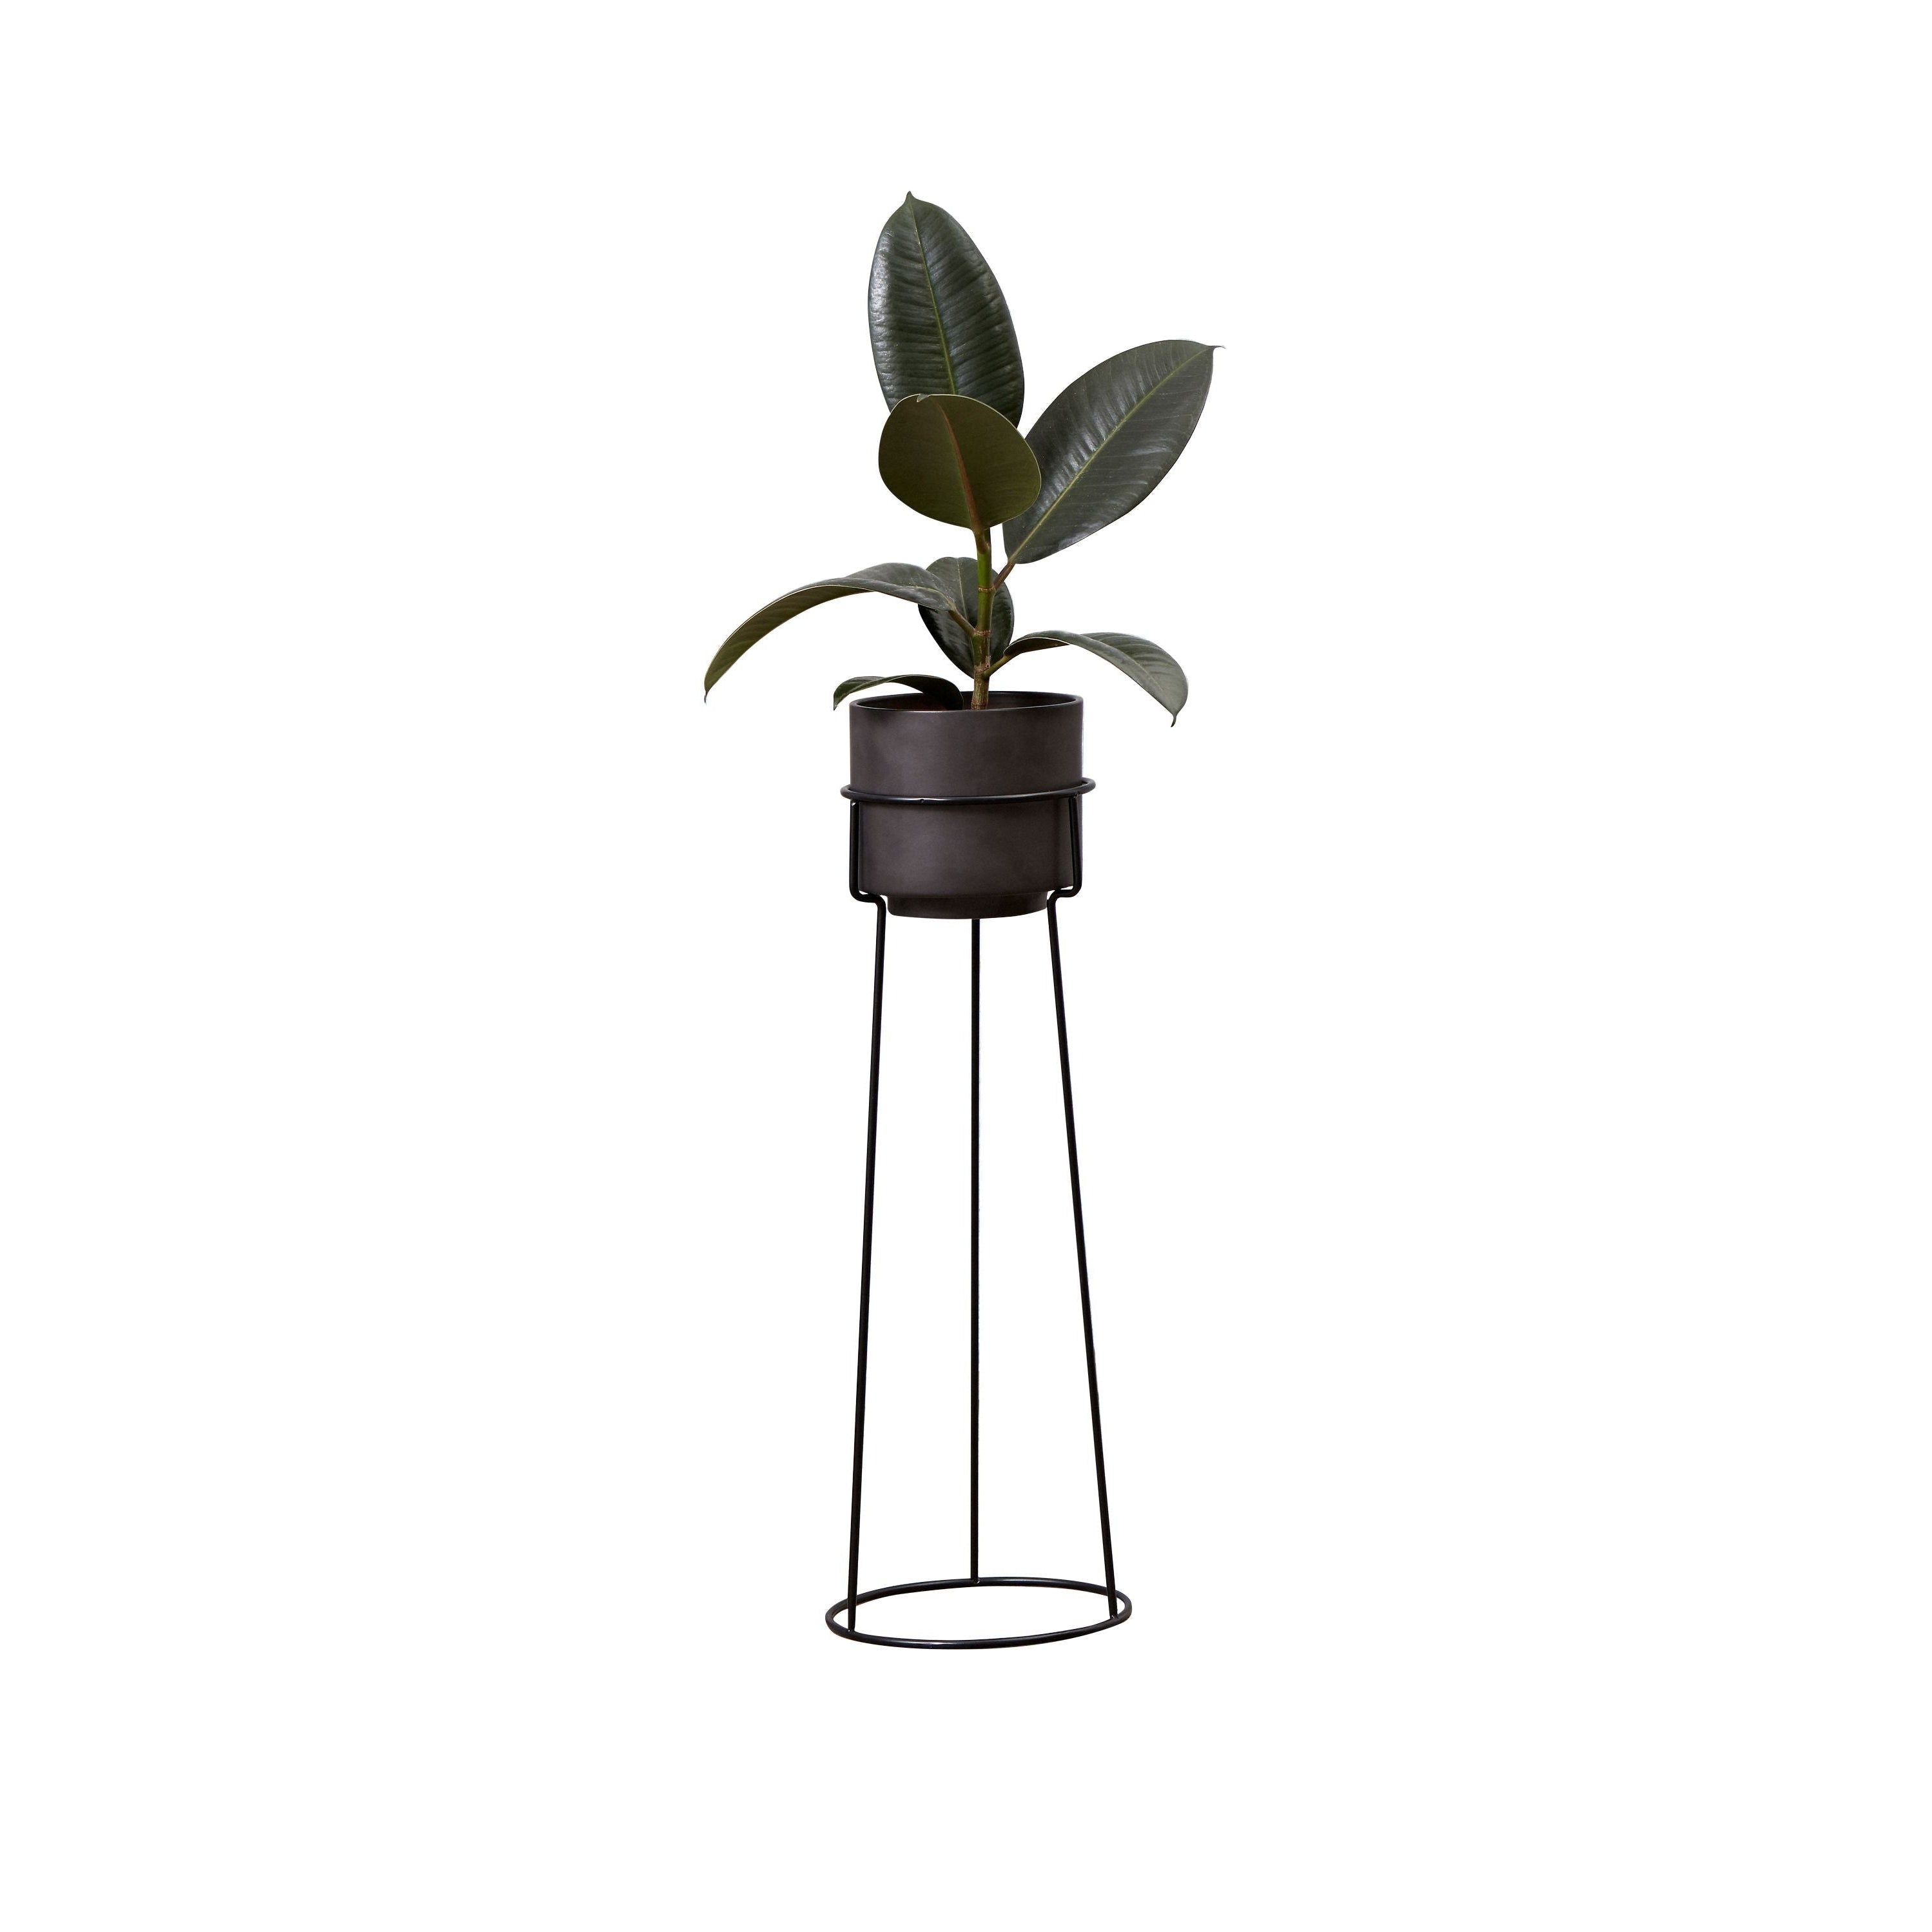 Andersen Furniture A Plant Blomster Opsats, H 48 Cm